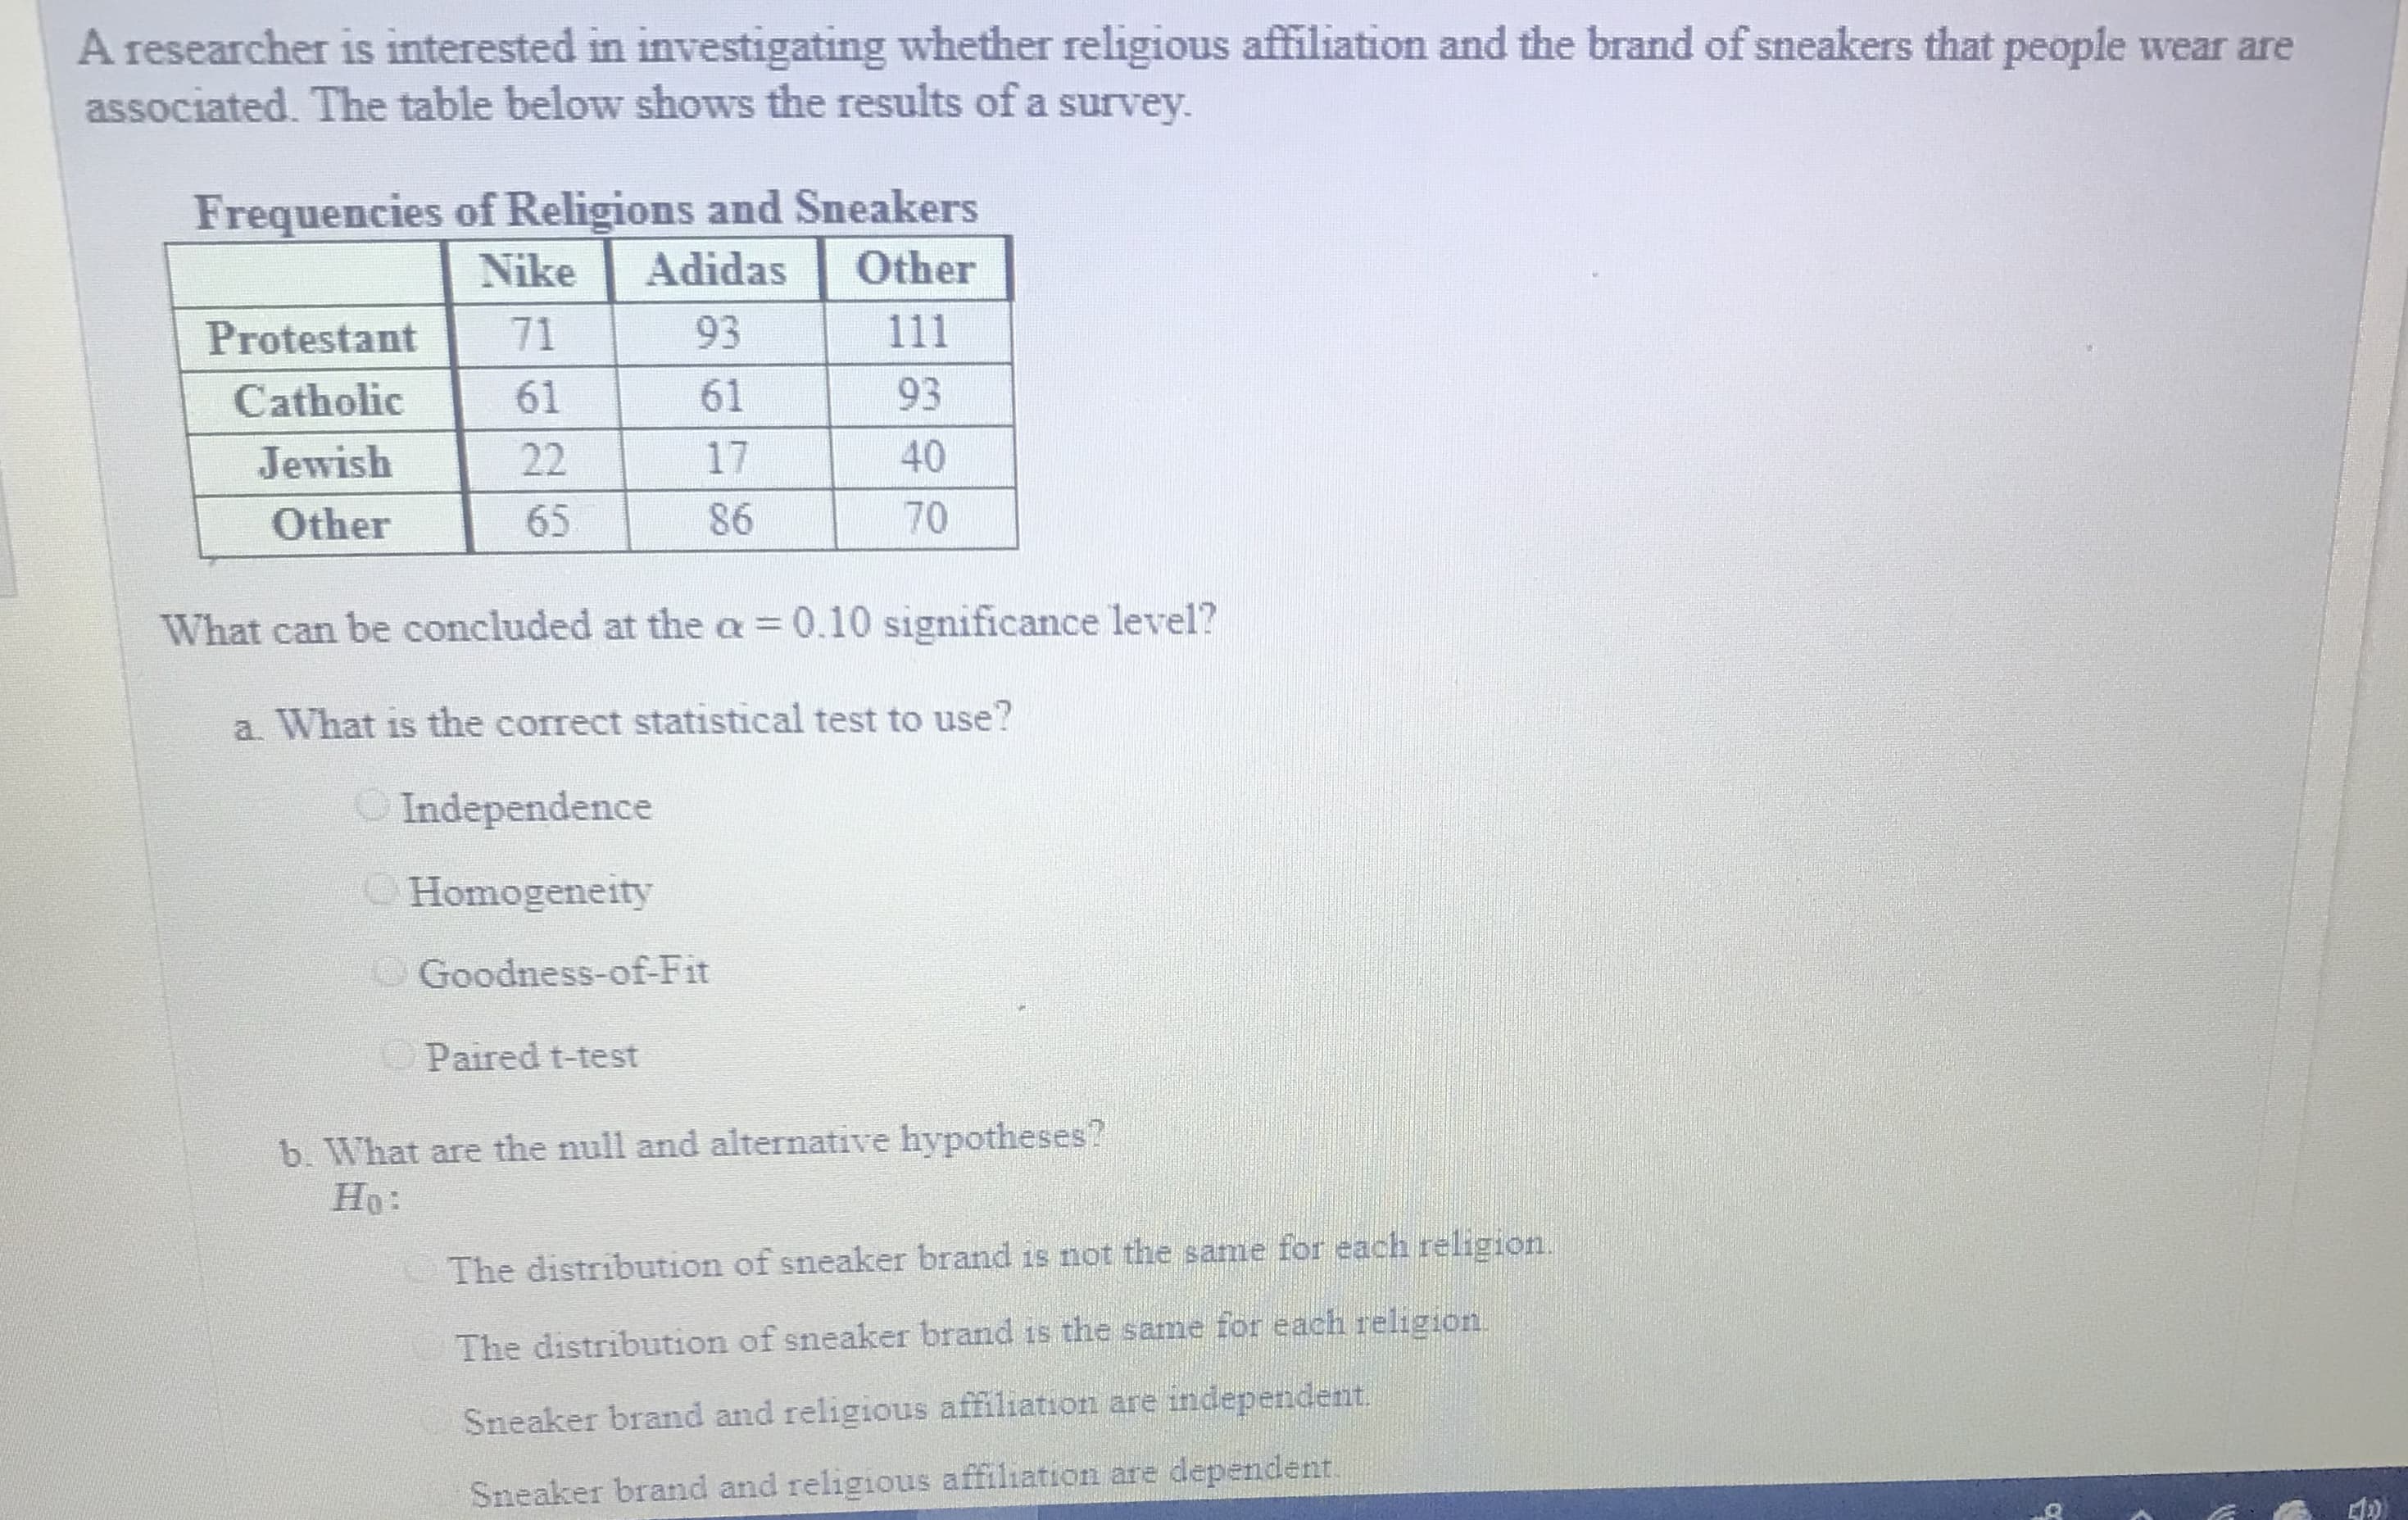 A researcher is interested in investigating whether religious affiliation and the brand of sneakers that people wear are
associated. The table below shows the results of a survey
Frequencies of Religions and Sneakers
Nike Adidas Other
Protestant 71 93 111
93
40
70
Catholic 61
Jewish
Other
61
17
86
65
What can be concluded at the a 0.10 significance level?
a. What is the correct statistical test to use?
Independence
Homogeneity
Goodness-of-Fit
Paired t-test
b. What are the null and alternative hypotheses?
Но:
The distribution of sneaker brand is not the same for each religion
The distribution of sneaker brand is the same for each religion
Sneaker brand and religious affiliation are independent
Sneaker brand and religious affiliation are dependent
